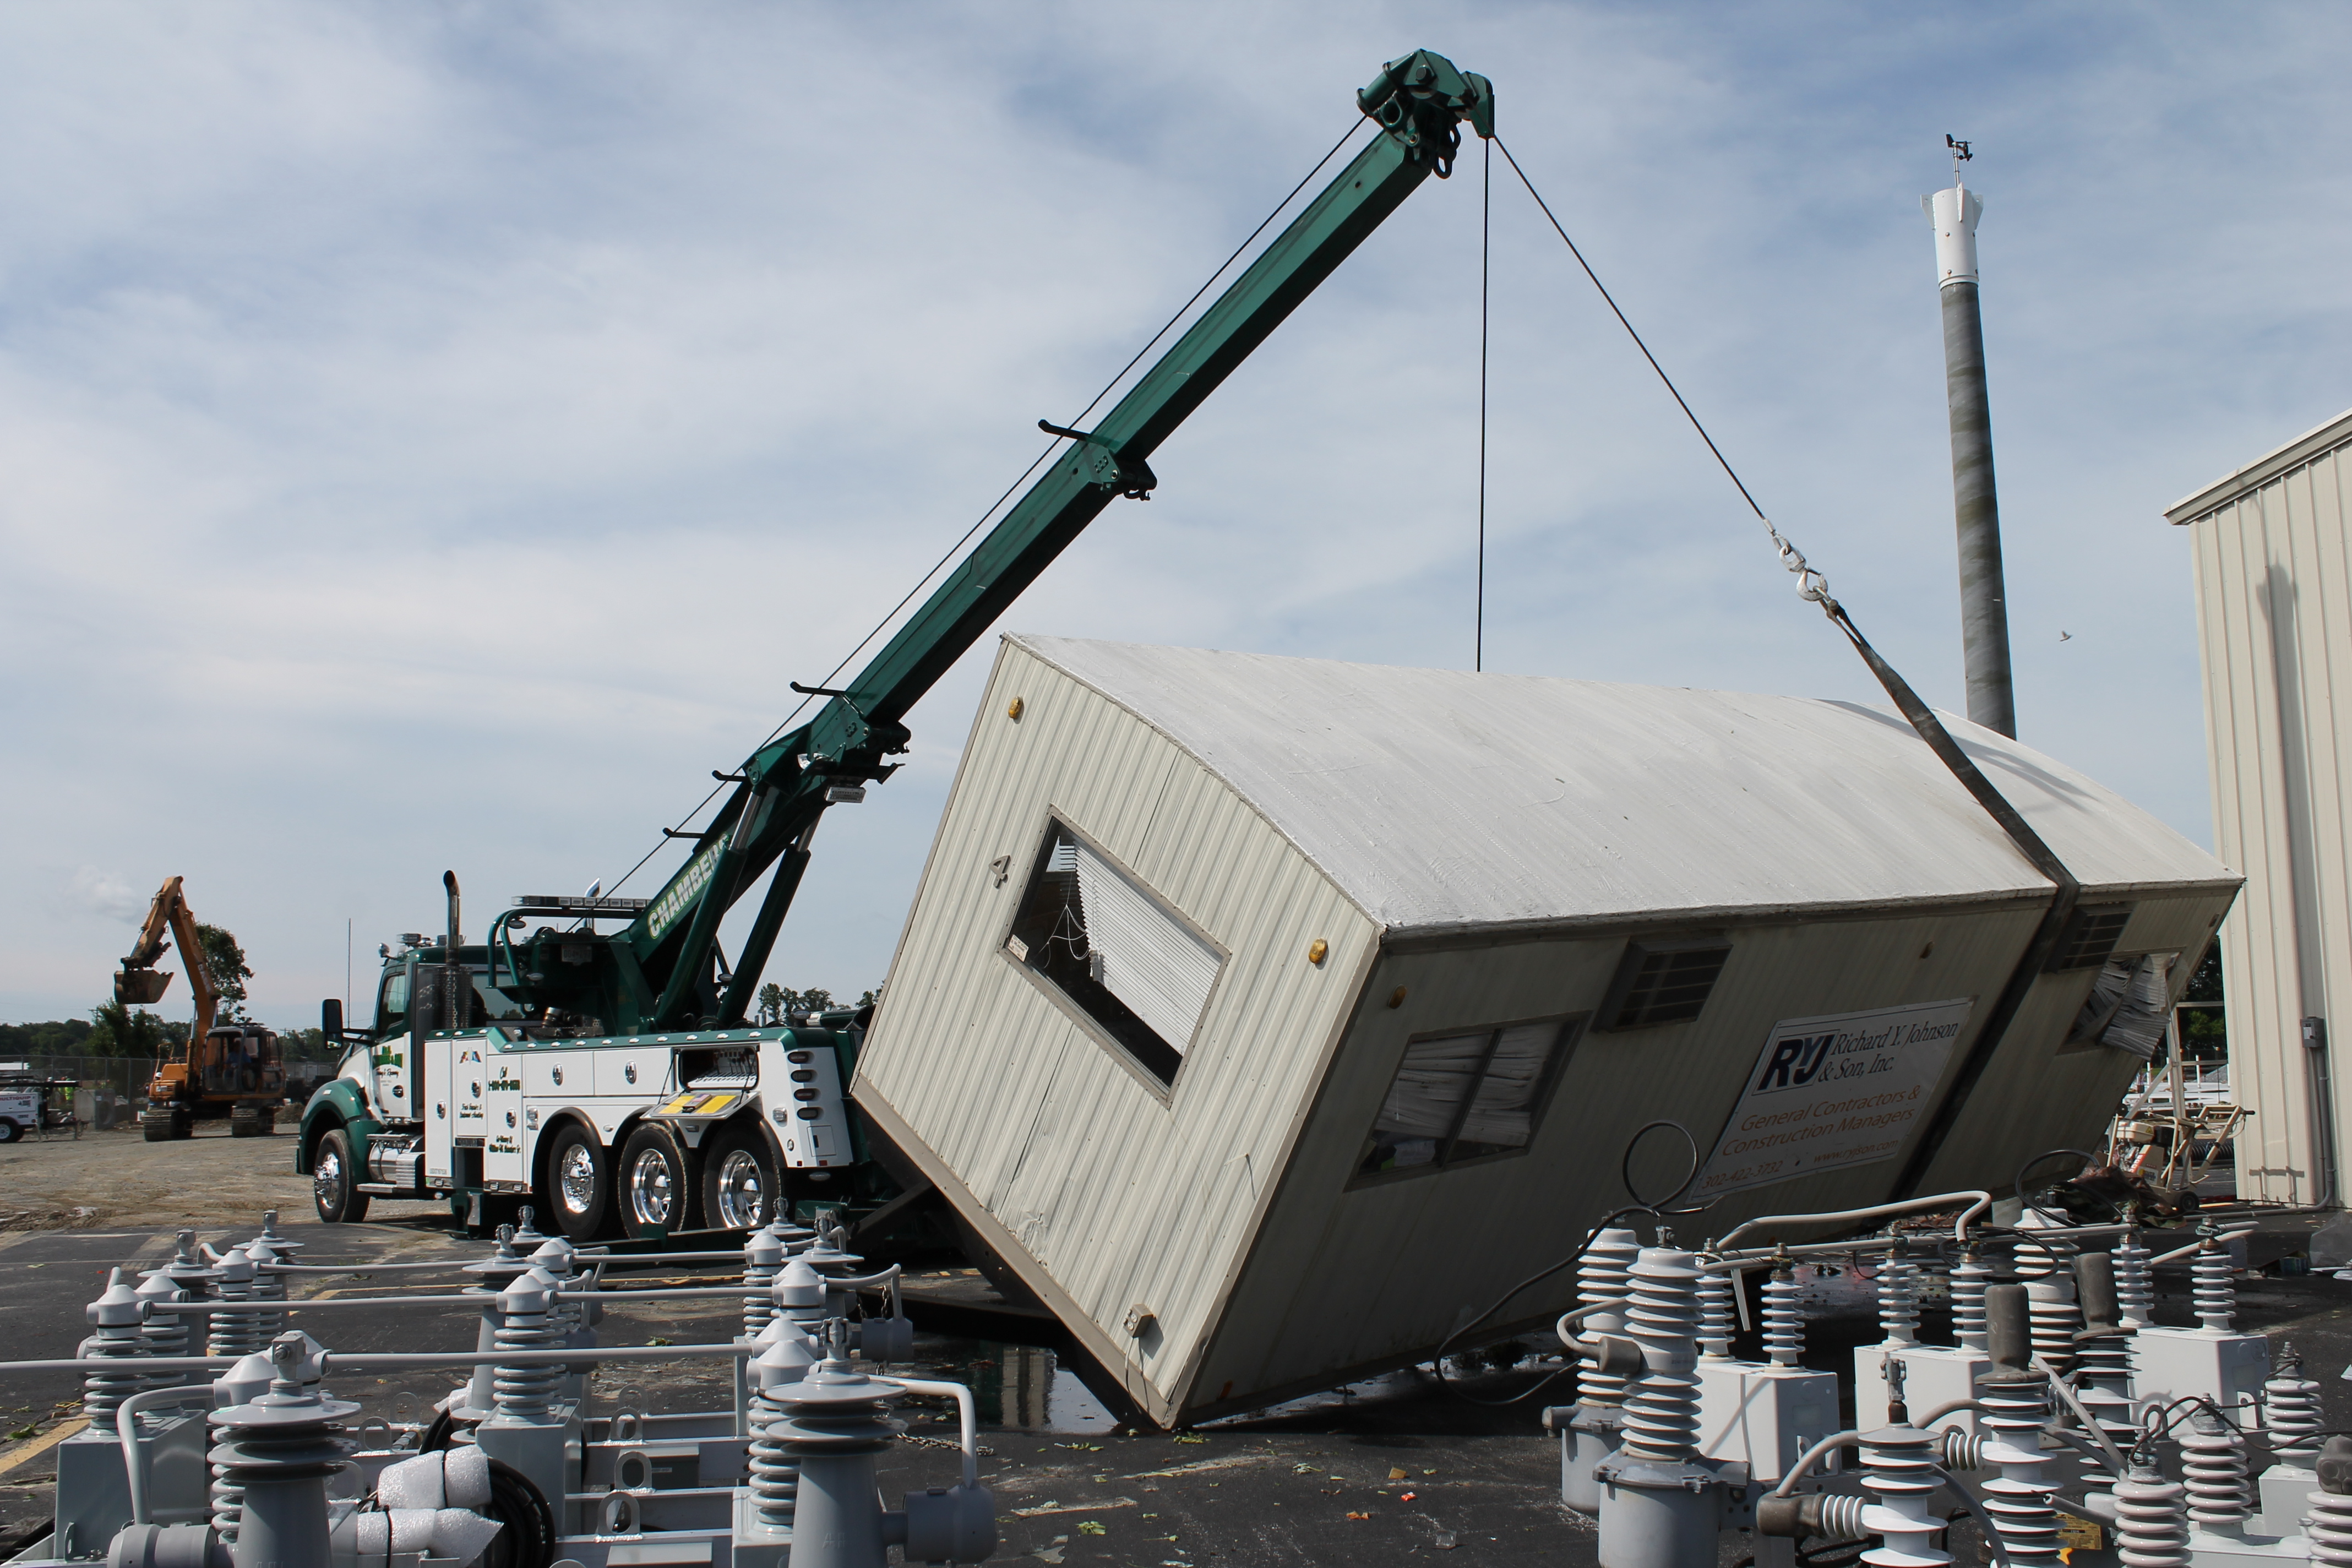 Crews lift trailers that were overturned in the storm.